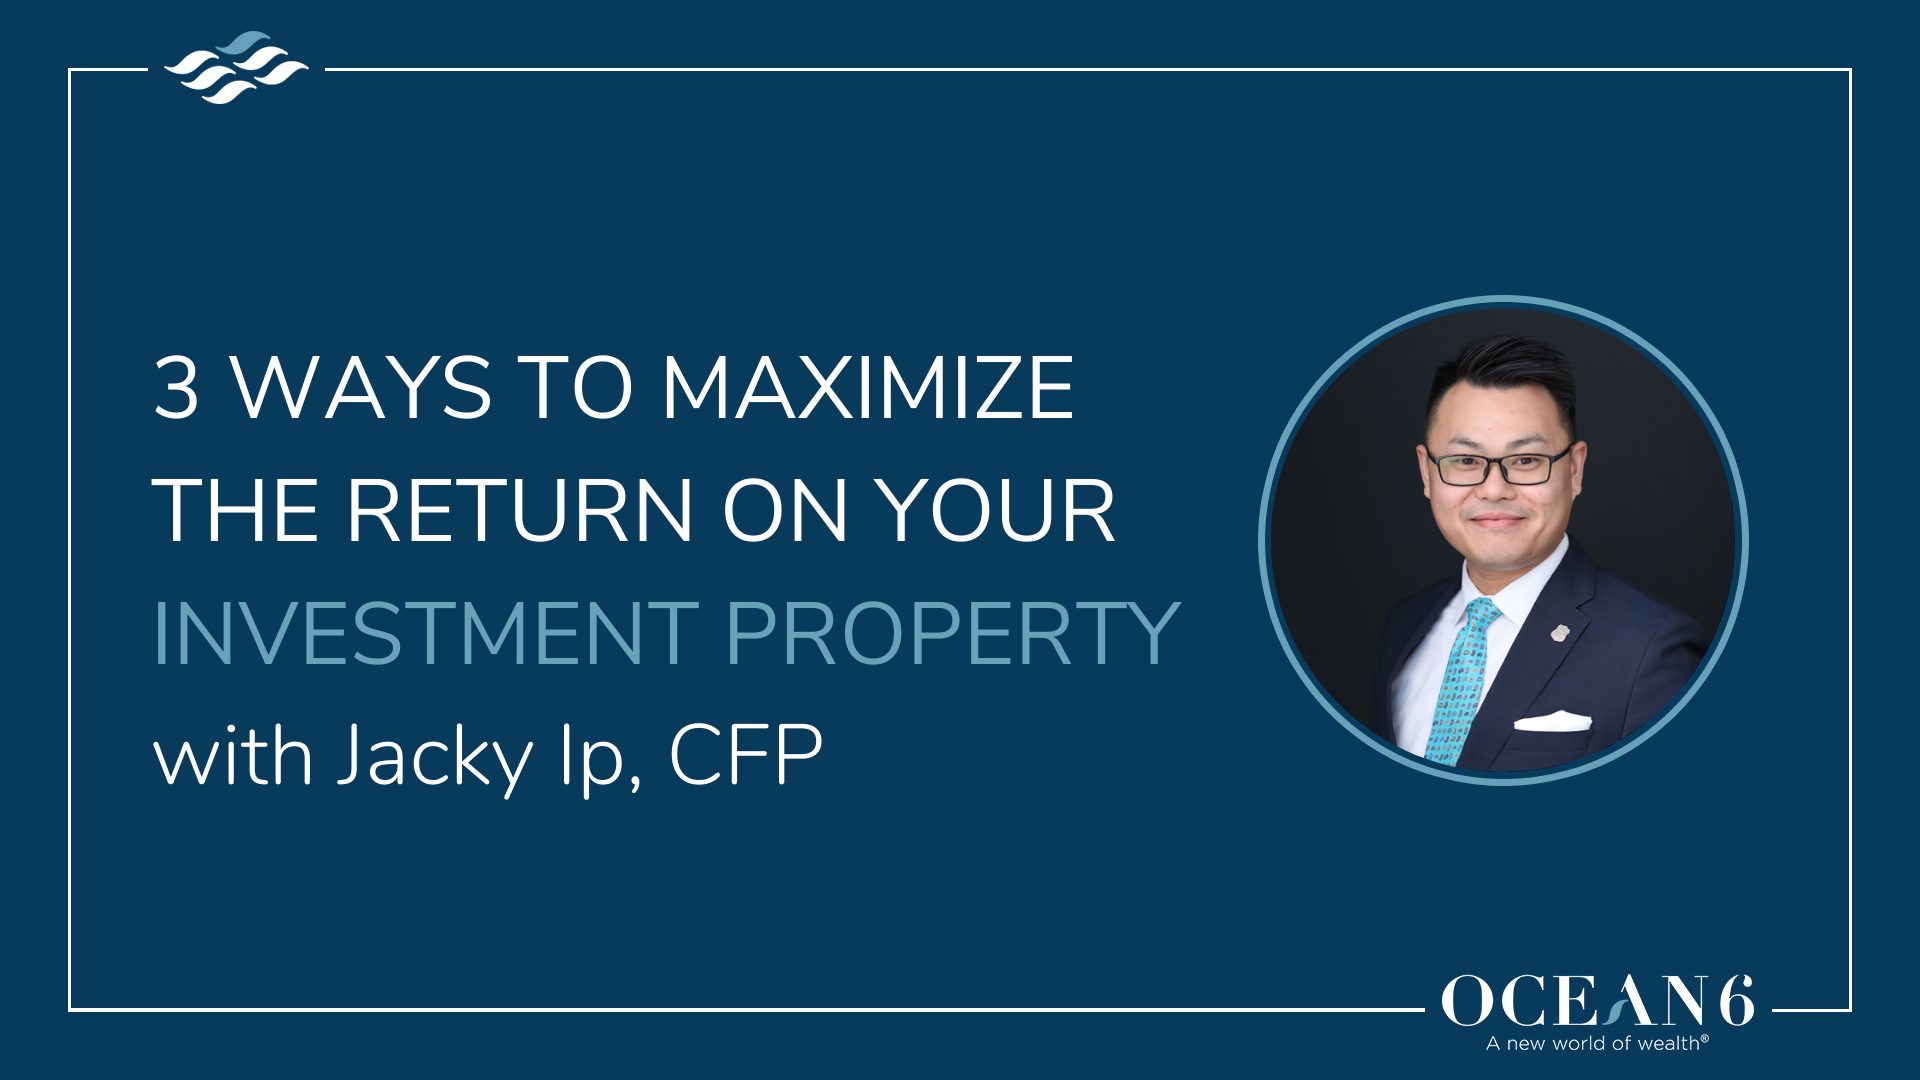 Blog thumbnail of financial advisor's head shot - 3 ways to maximize the return on investment property